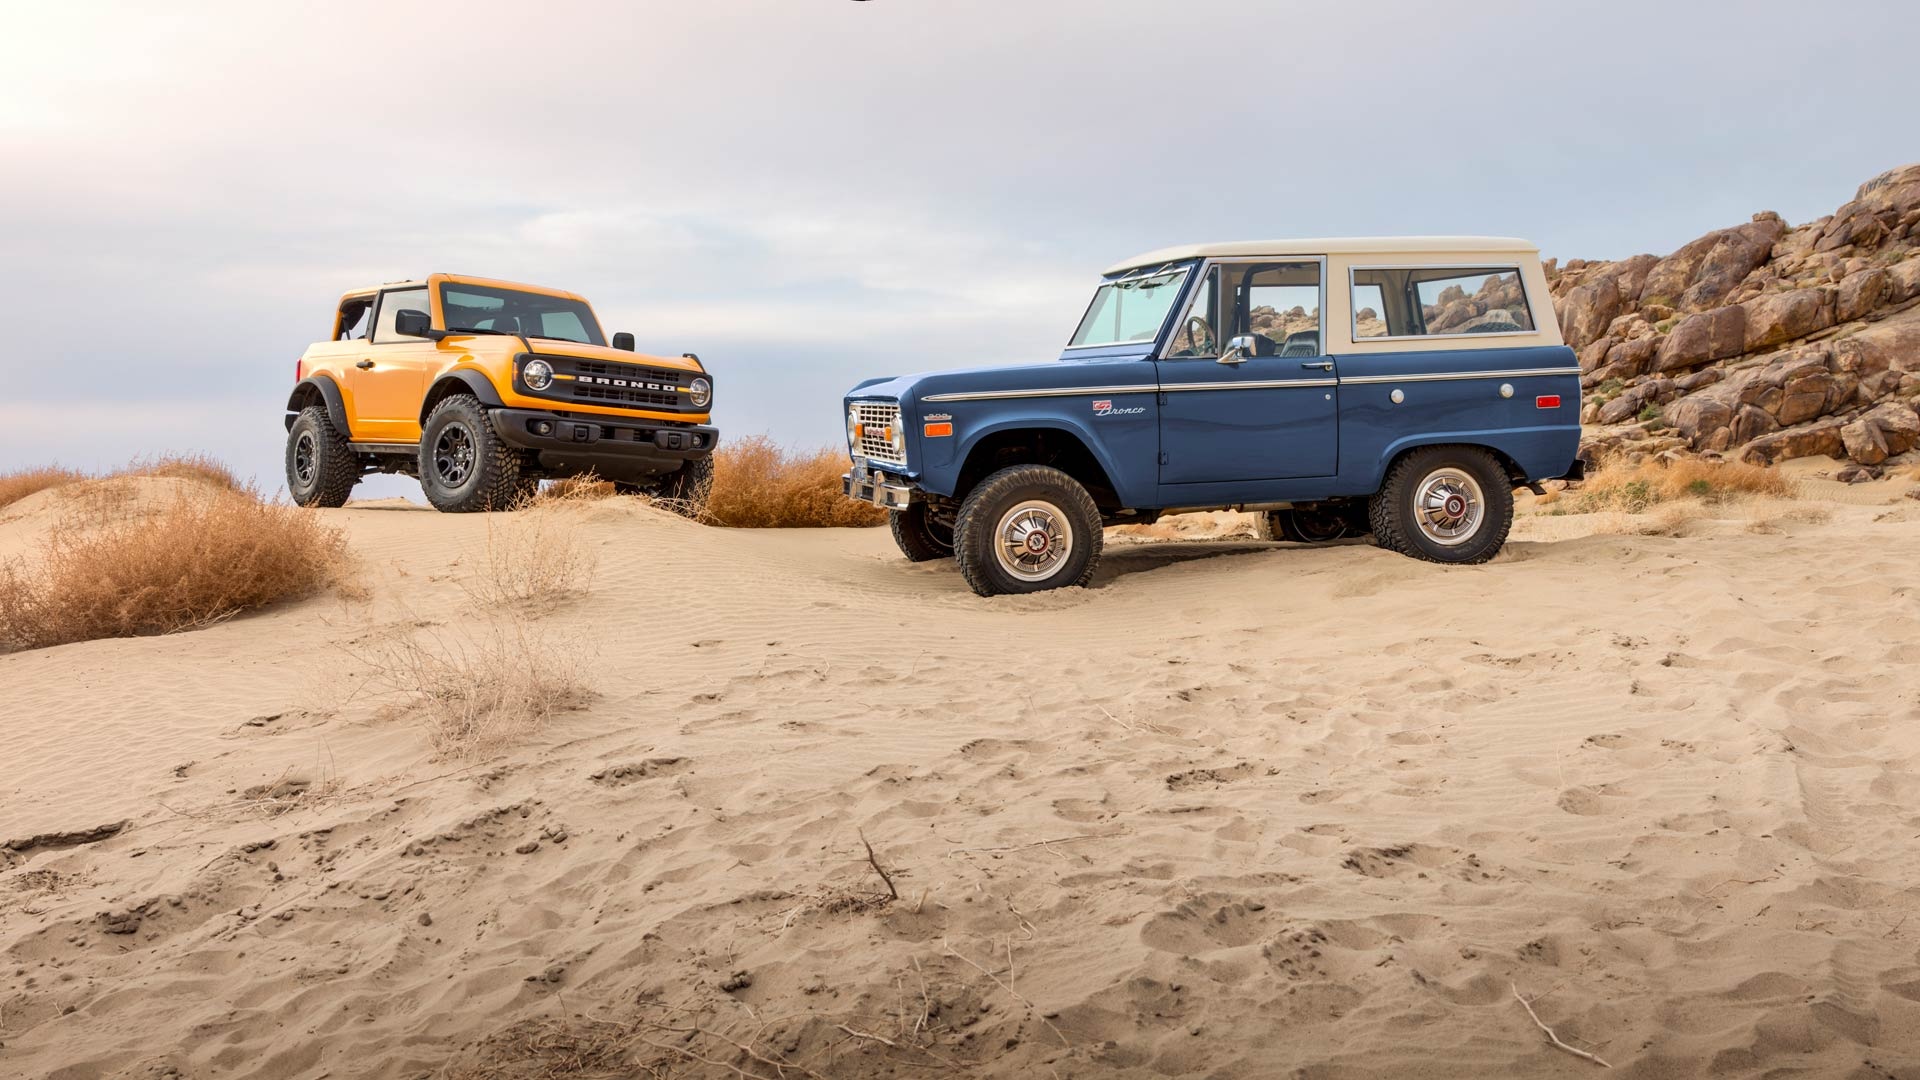 Ford Bronco: Meeting Of Generations, Vintage Model Of 1965 And One Of The Latest In Bronco Family. 1920x1080 Full HD Wallpaper.